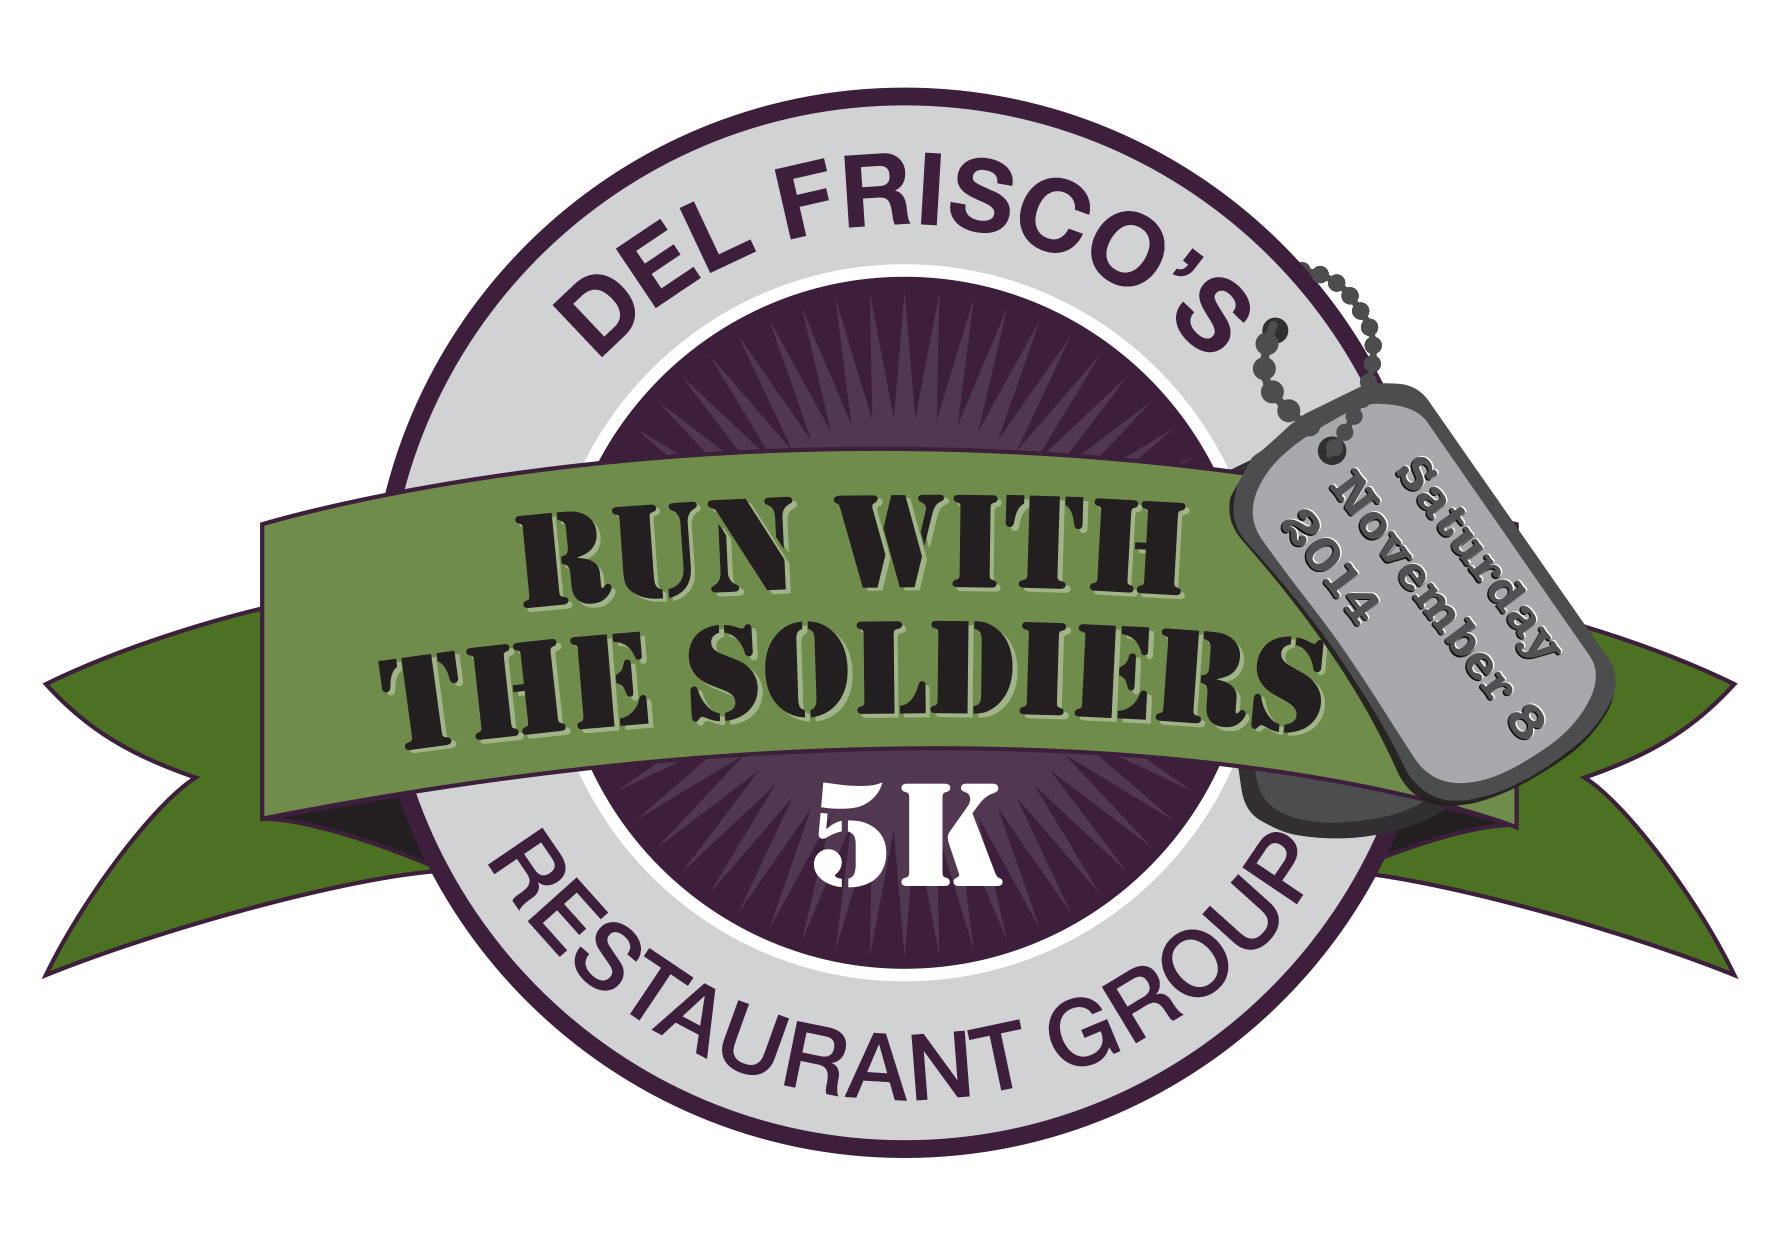 Del Frisco's Run with the Soldiers 5K